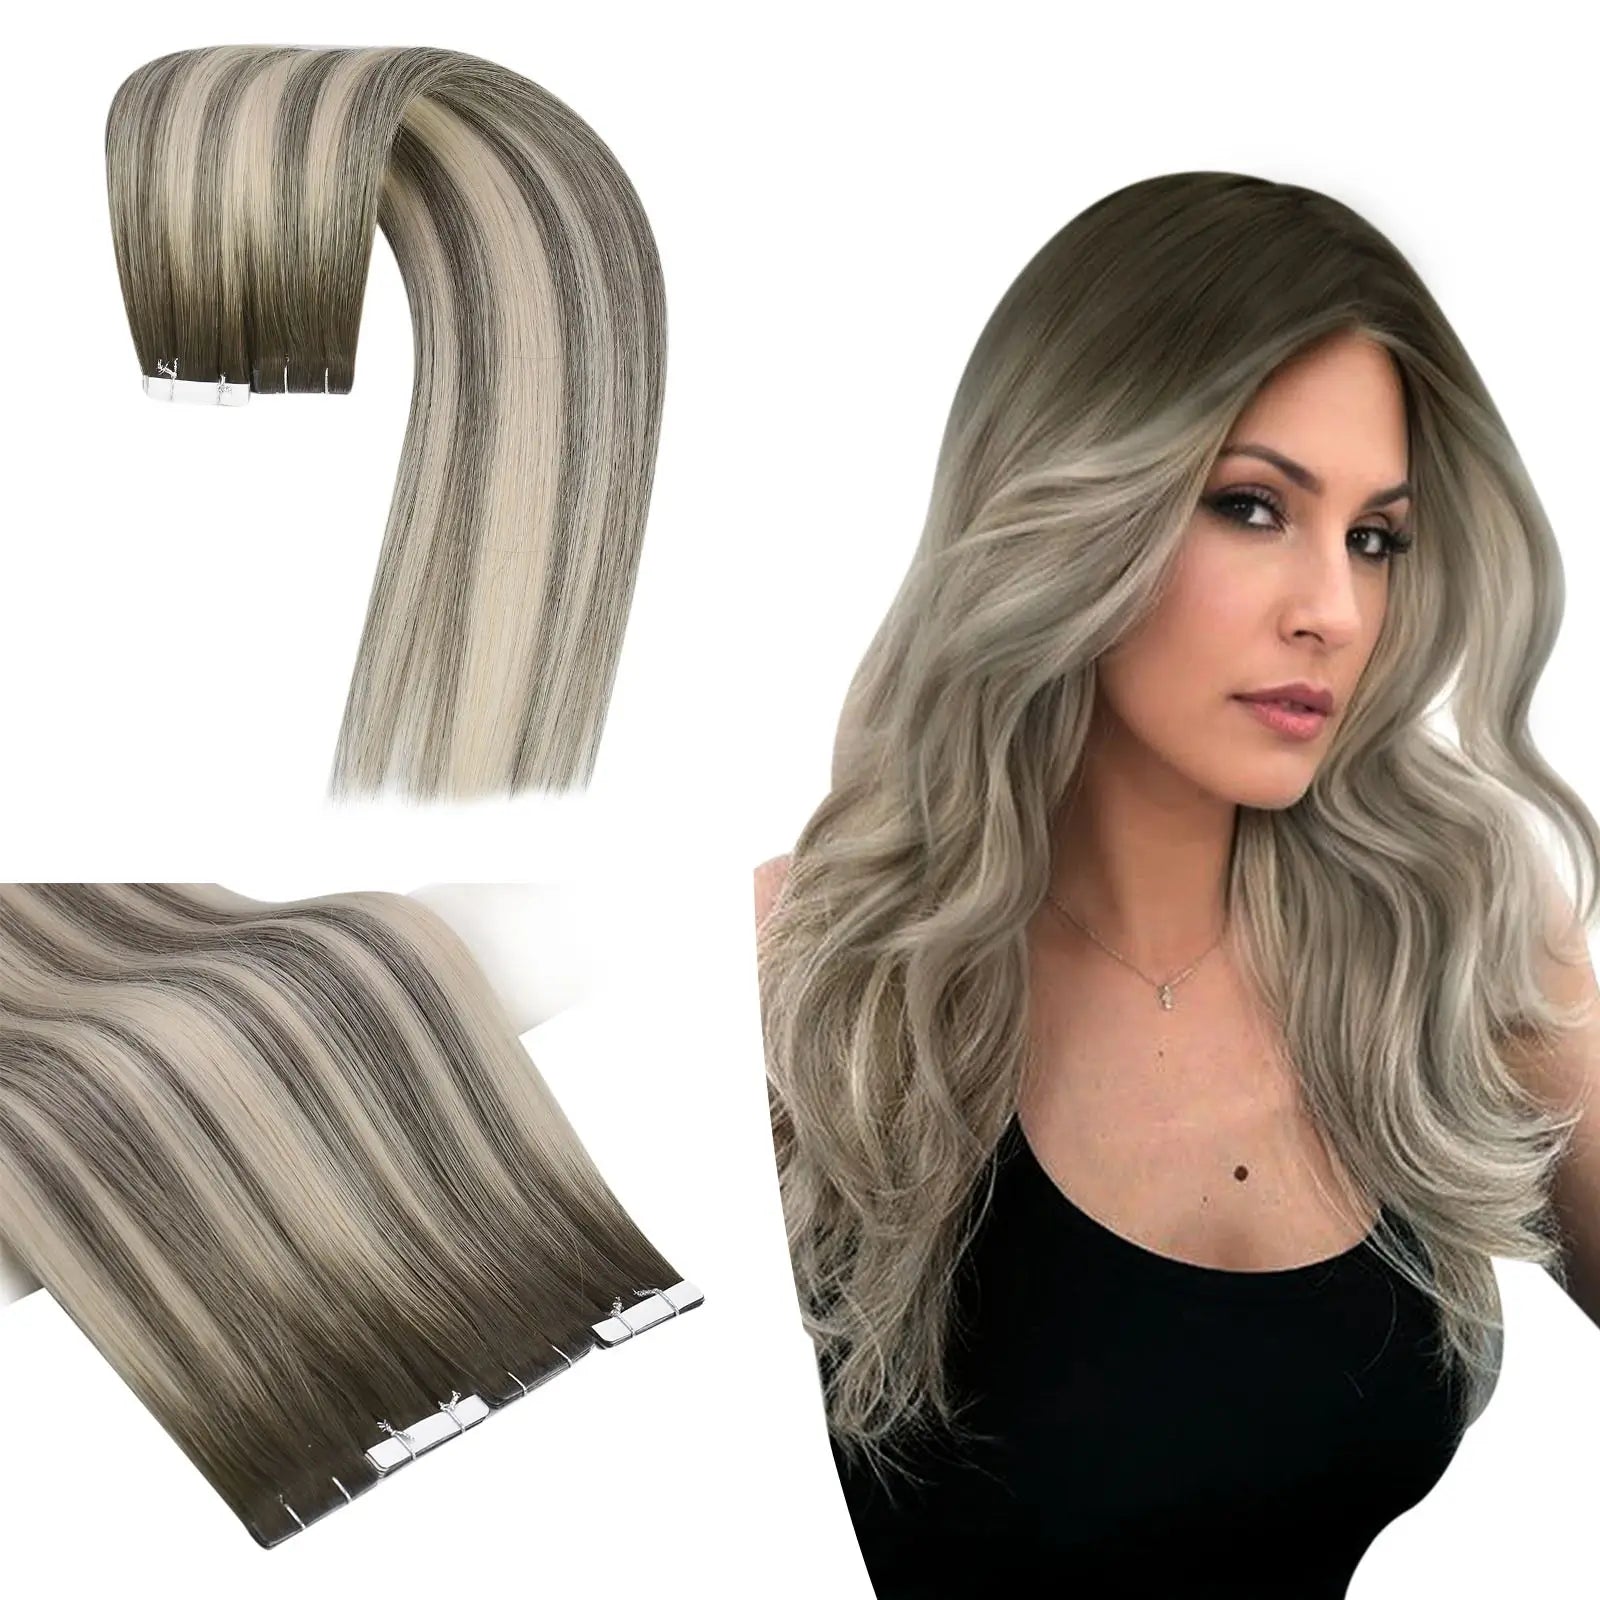 High quality tape hair extensions that last a long time